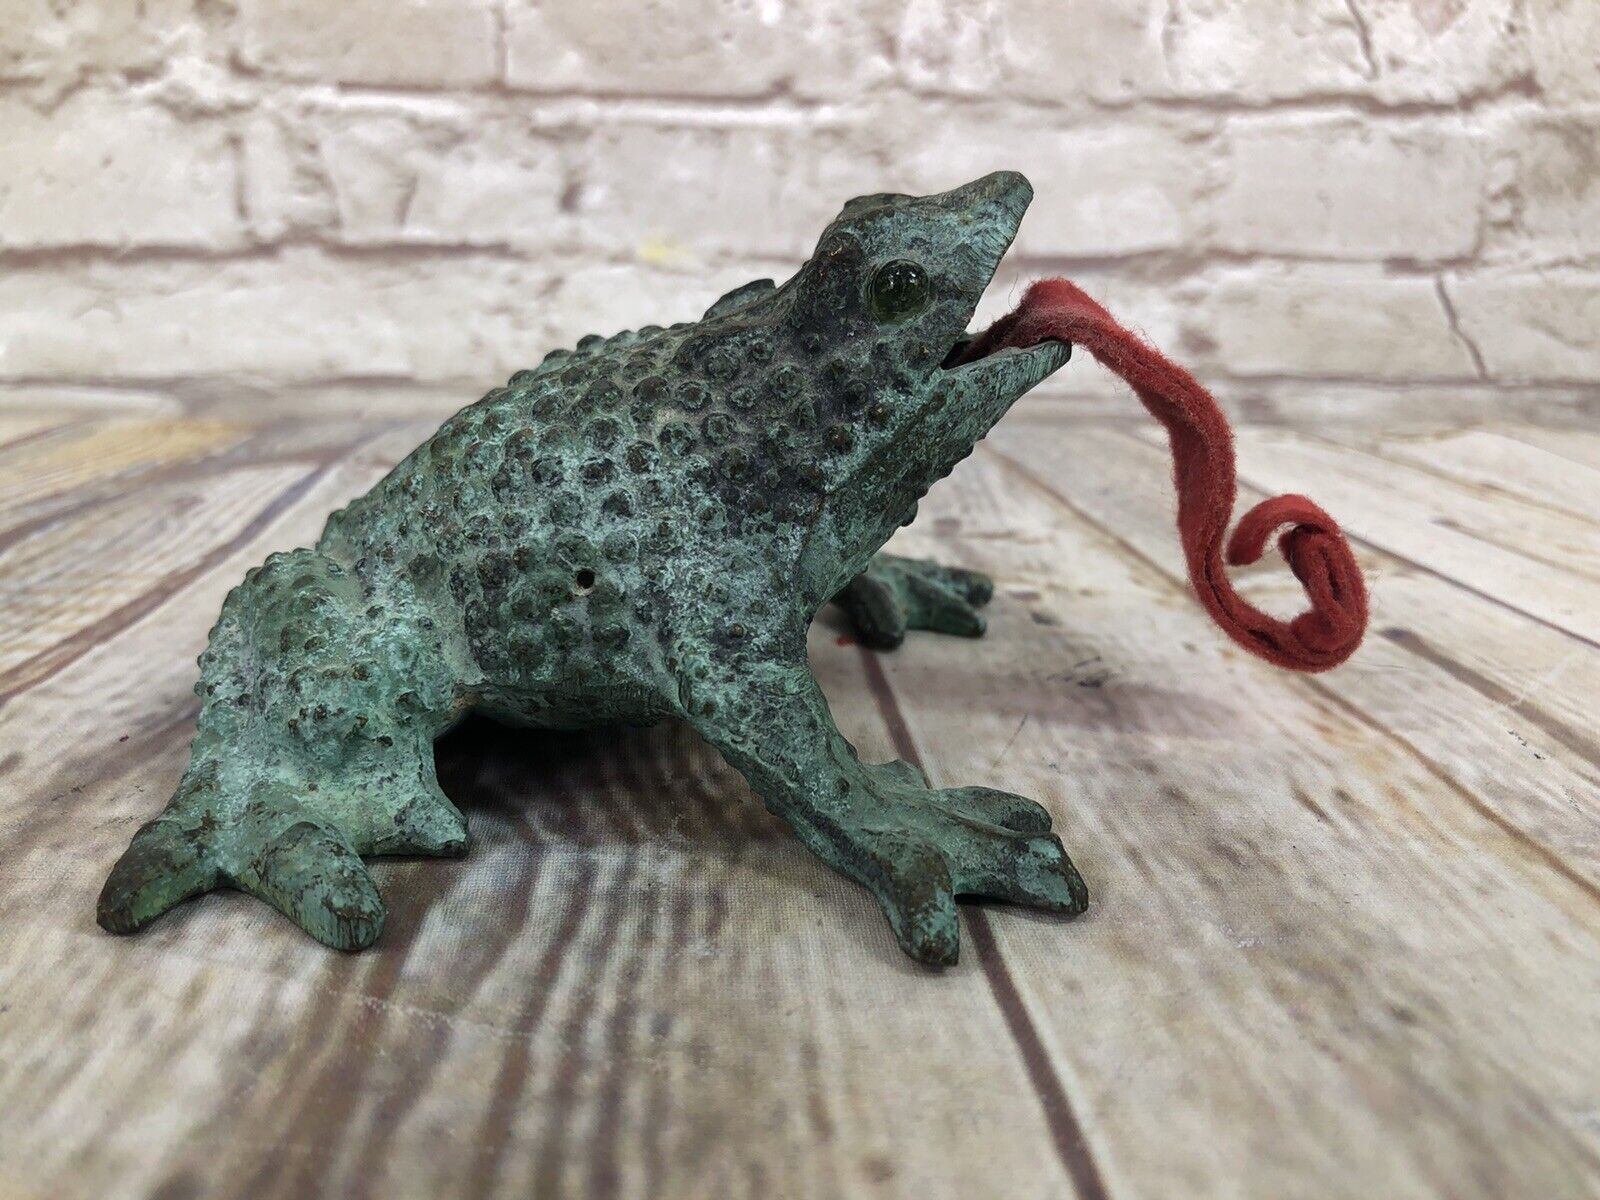 vtg Cast Iron green patina tung out frog figurine 4x3 